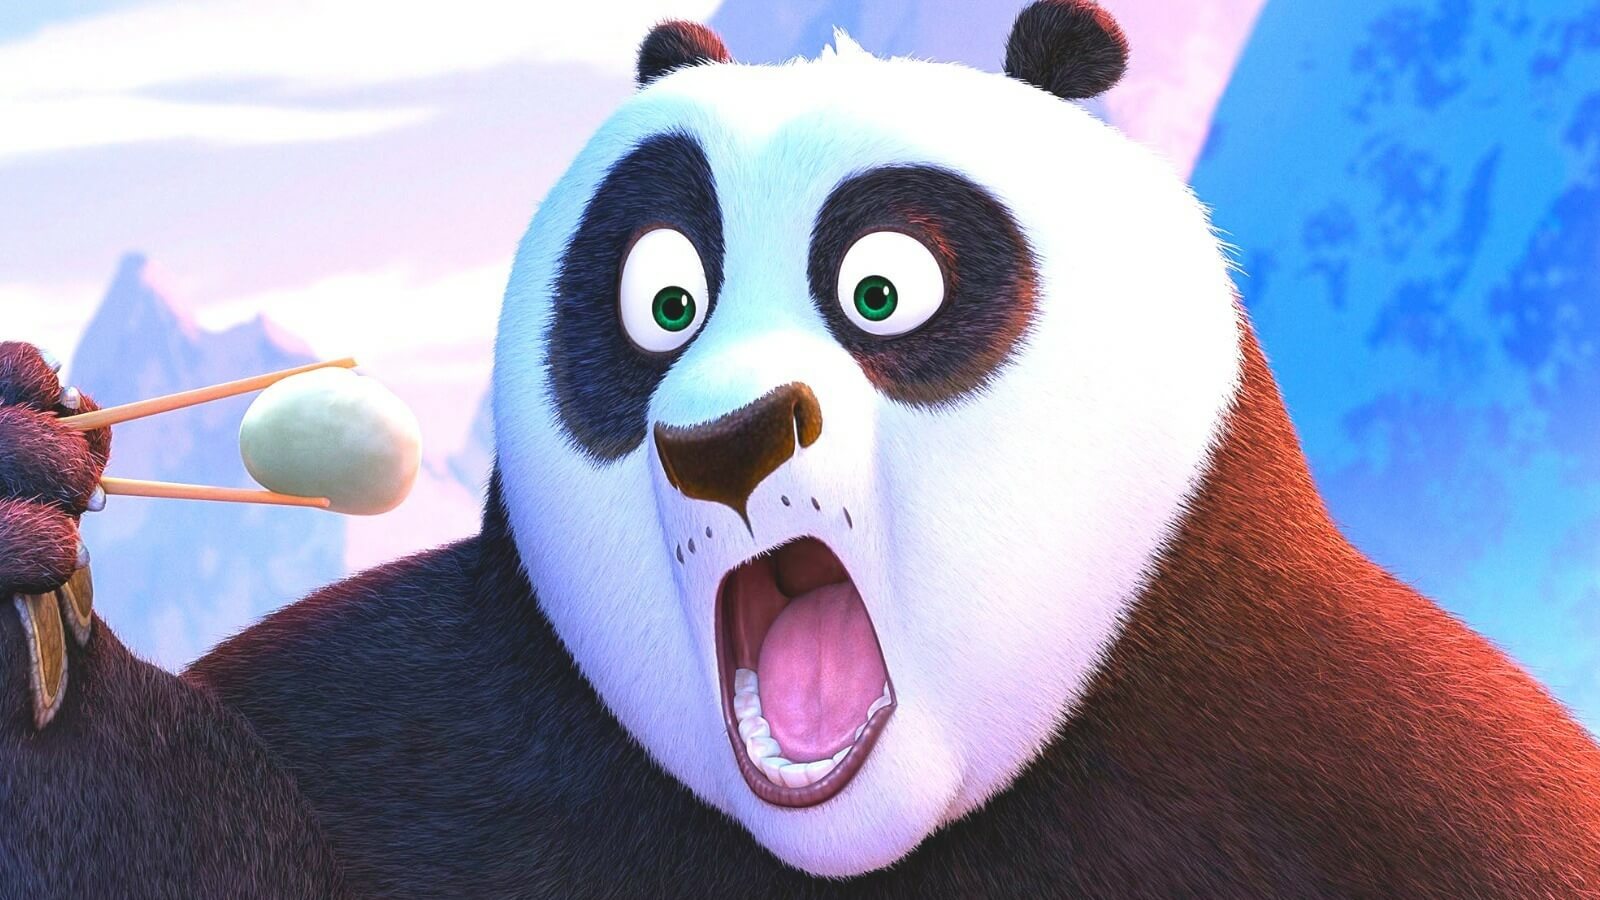 Kung Fu Panda 4 set to be best animation by DreamWorks 